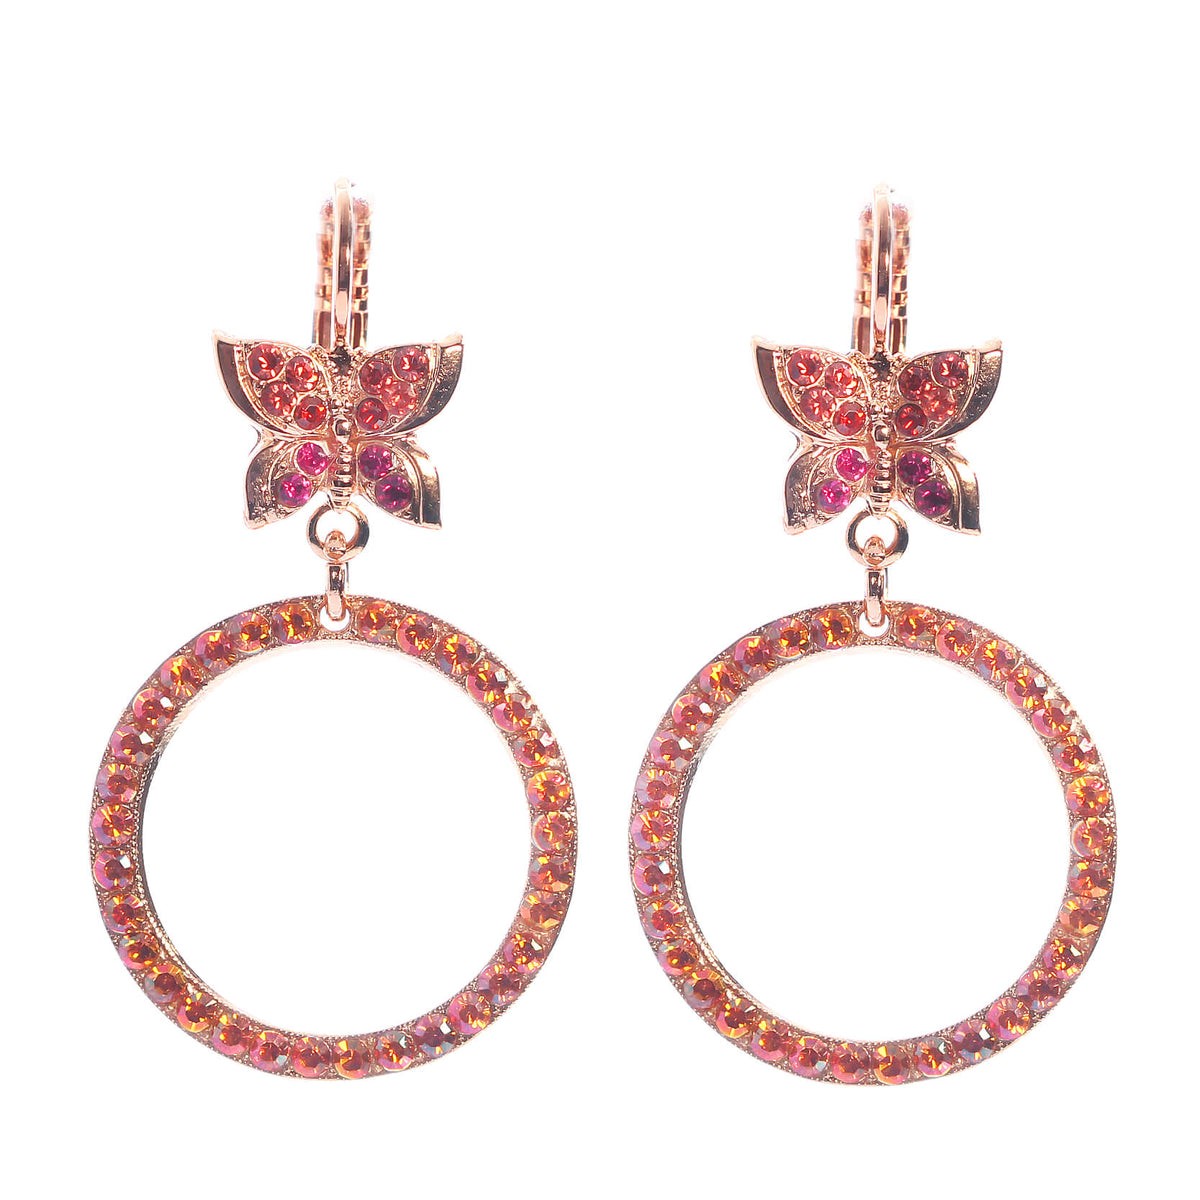 Mariana has featured fuchsia pink, ripe mango and fire engine red Swarovski crystals in this vibrant collection, named Sorbet Delight.A delightful, fun setting with a small butterfly at the top and round hoops on the bottom. Measures 4.5cm, set with French hooks and enveloped in warm rose gold plating.